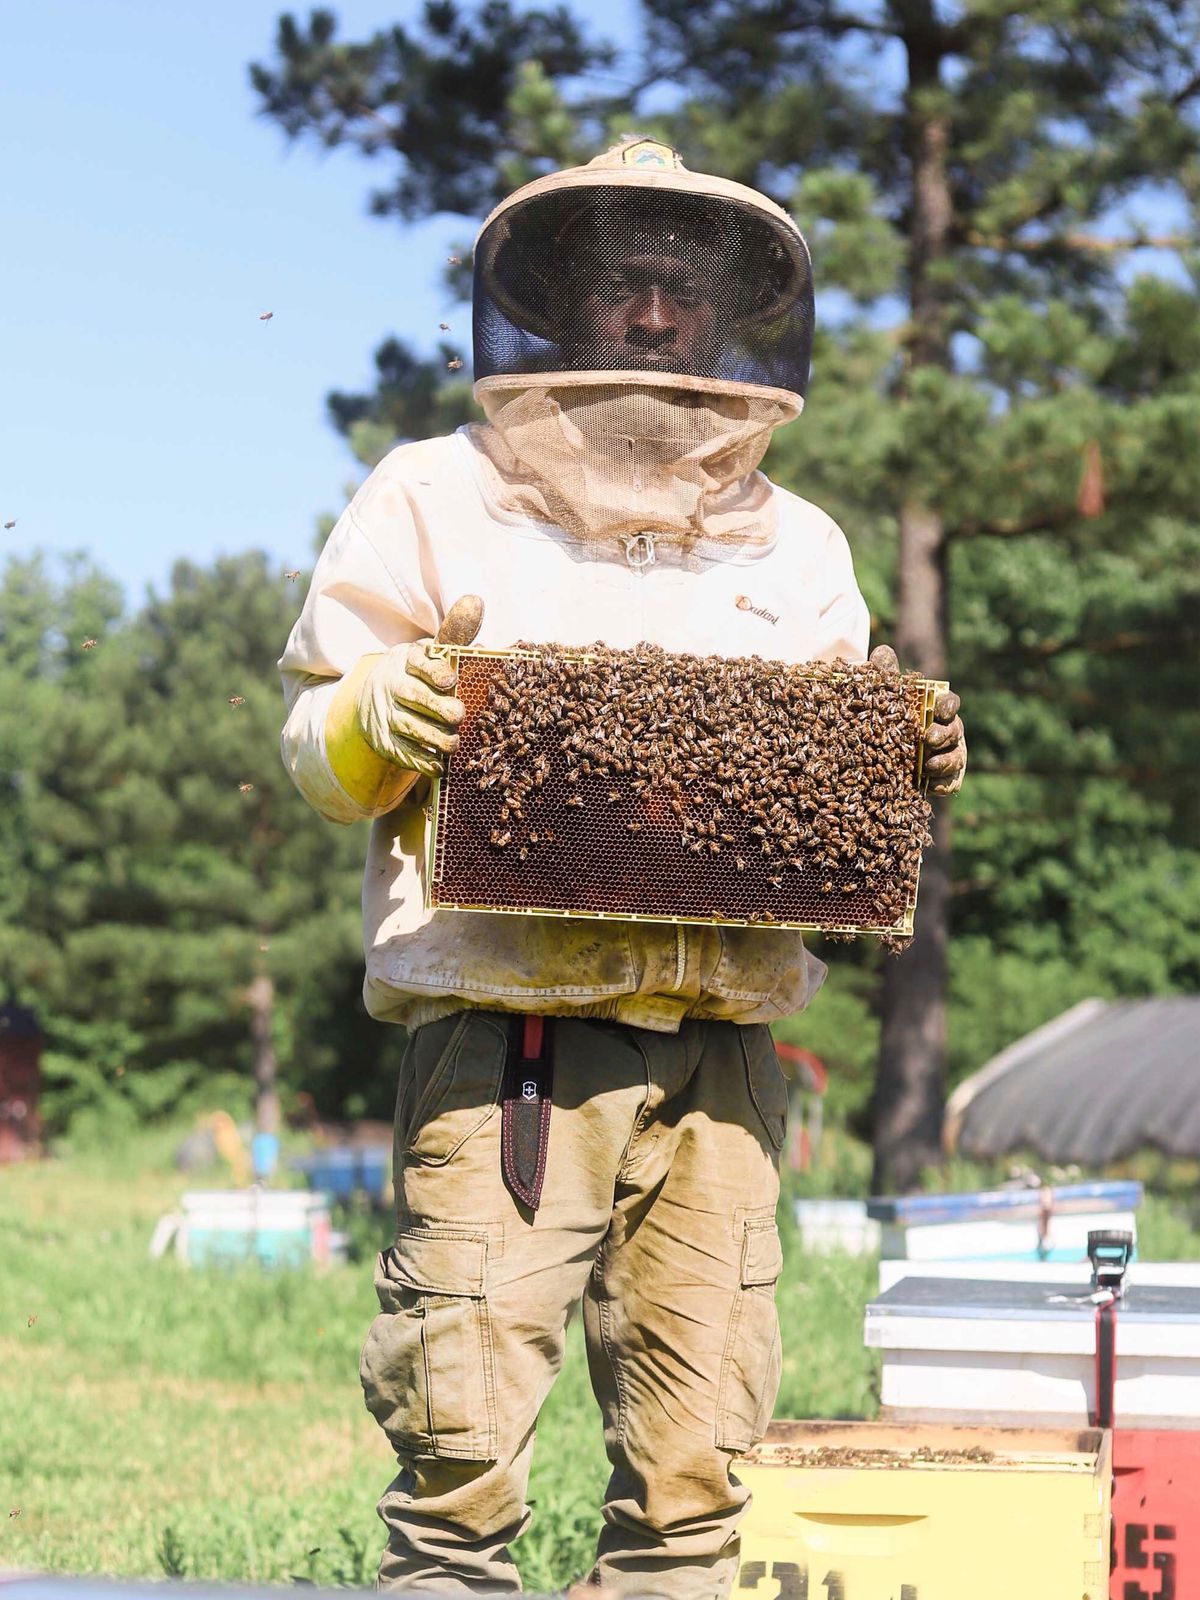 Man in a beekeeping outfit holding up a rectangle screen full of bees.